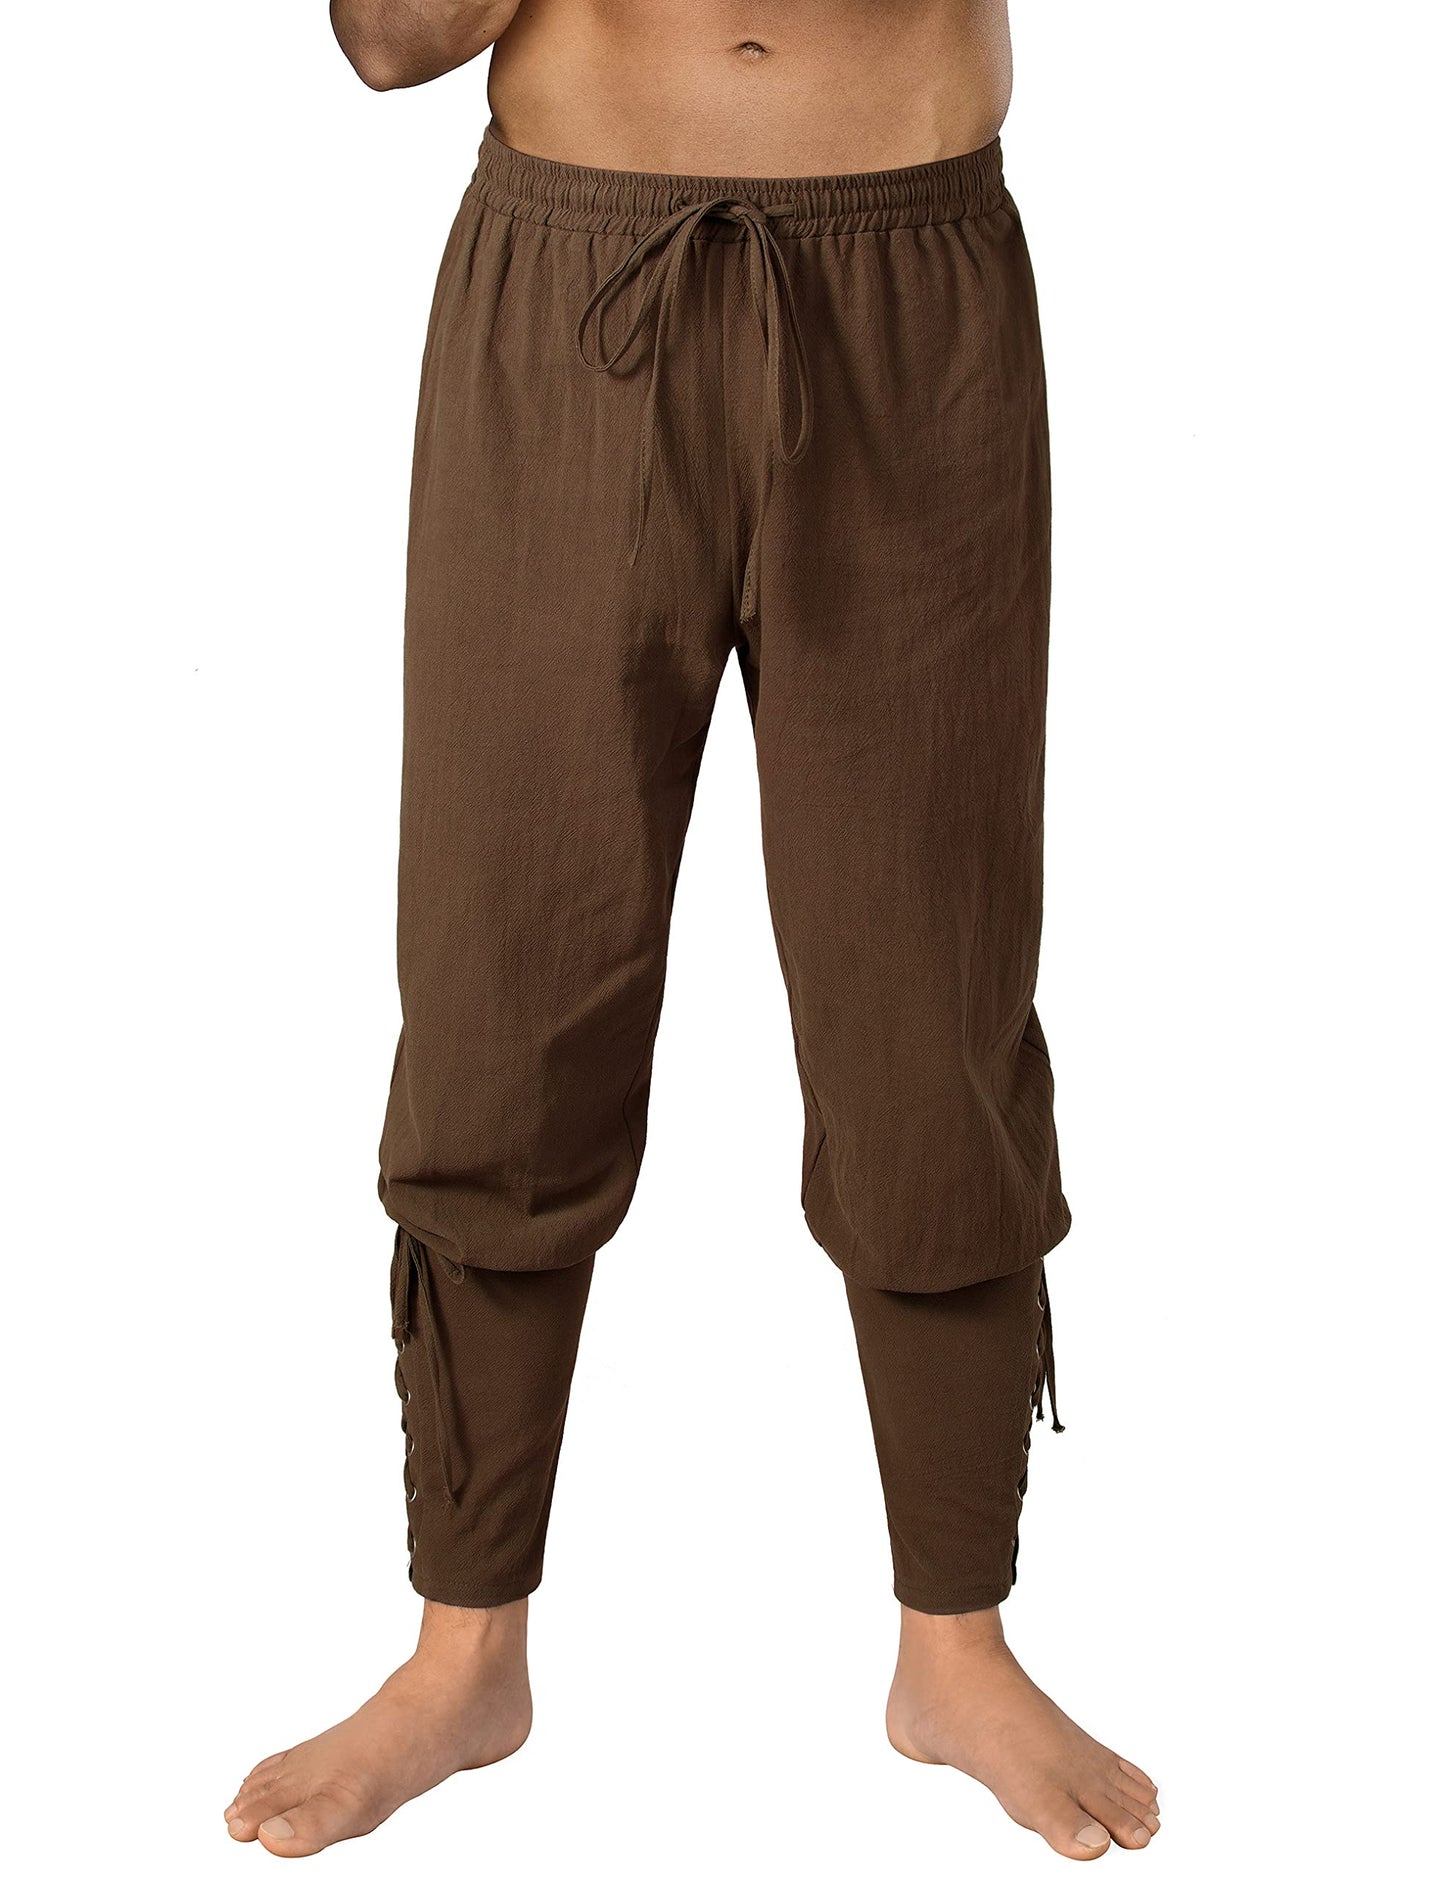 Men's Medieval Ankle Pants - Viking Pirate Renaissance Costume Trousers with Drawstrings & Banded Cuffs 28,29 Army Green